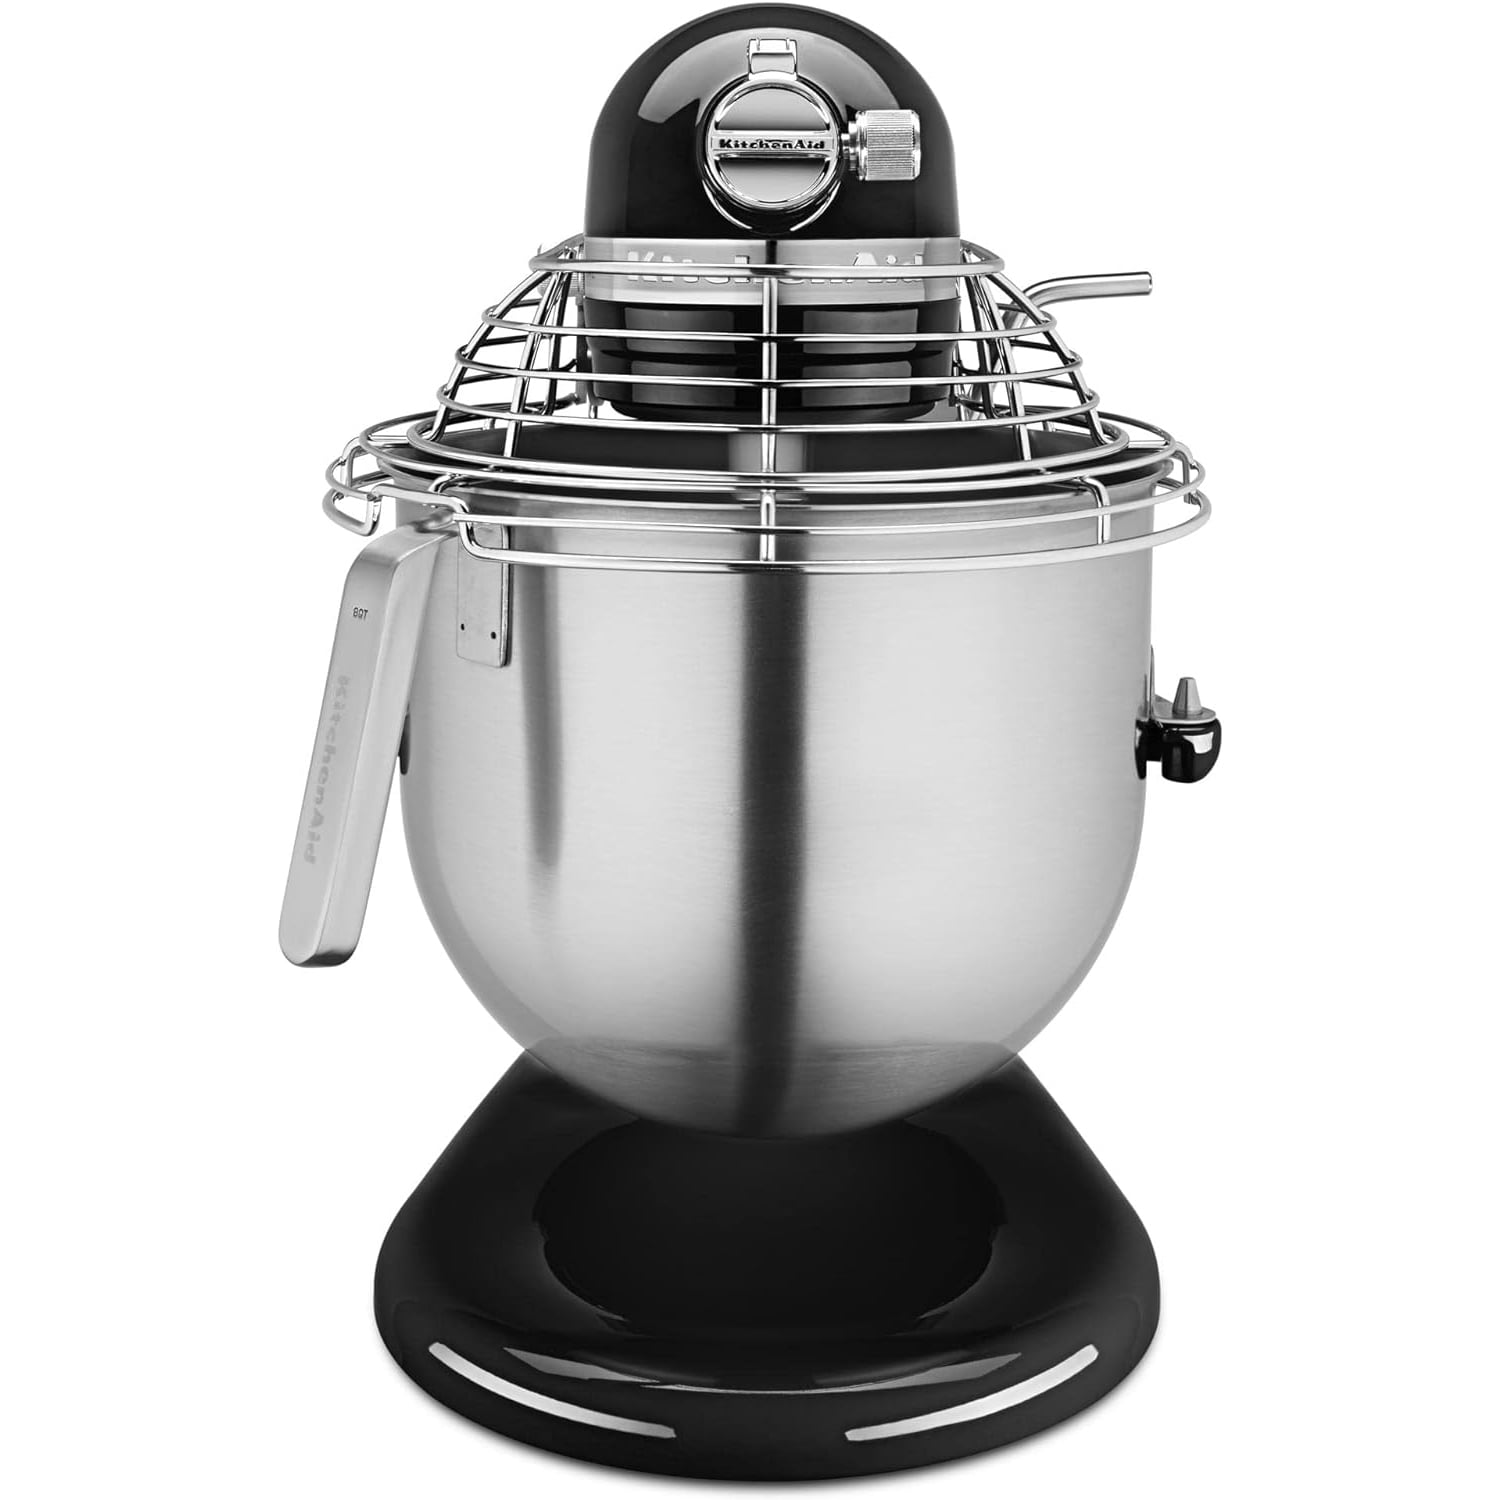 KitchenAid Commercial 8 Quart Bowl-Lift Stand Mixer with Bowl Guard |  Multiple Colors Available